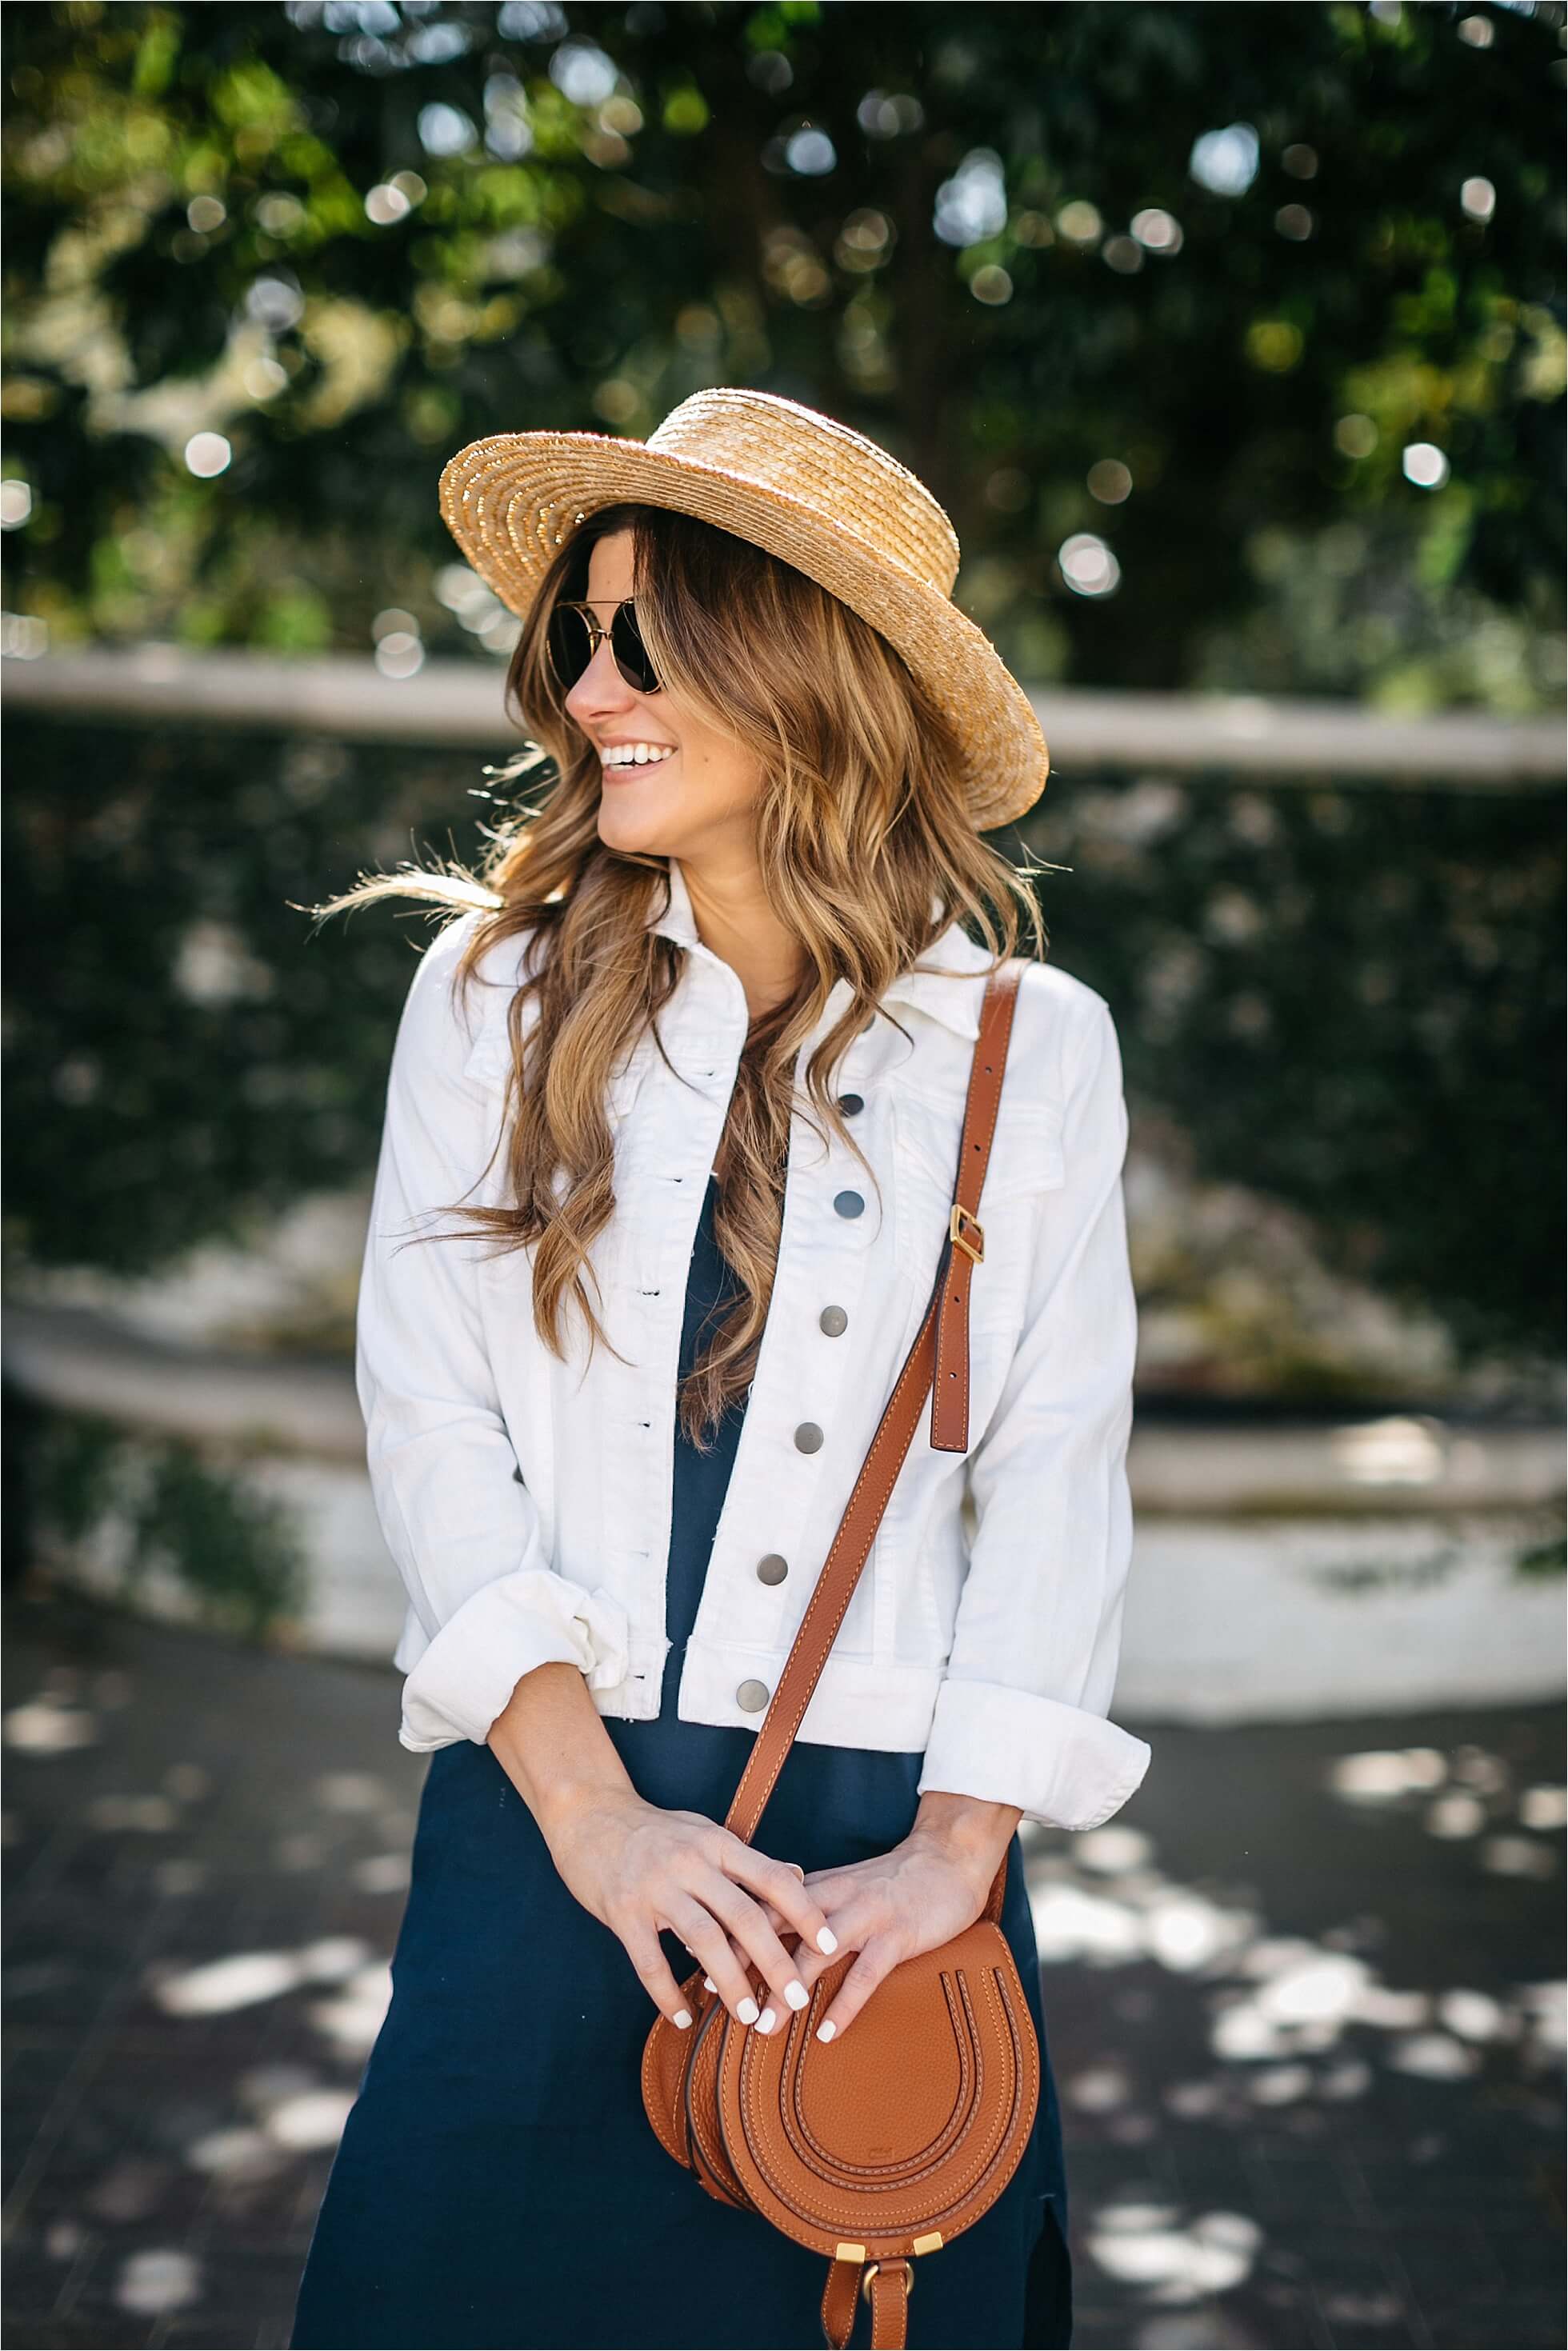 how to style a slip dress, splendid navy midi slip dress, cognac suede shoes, boater hat, chloe drew bag, spring outfit